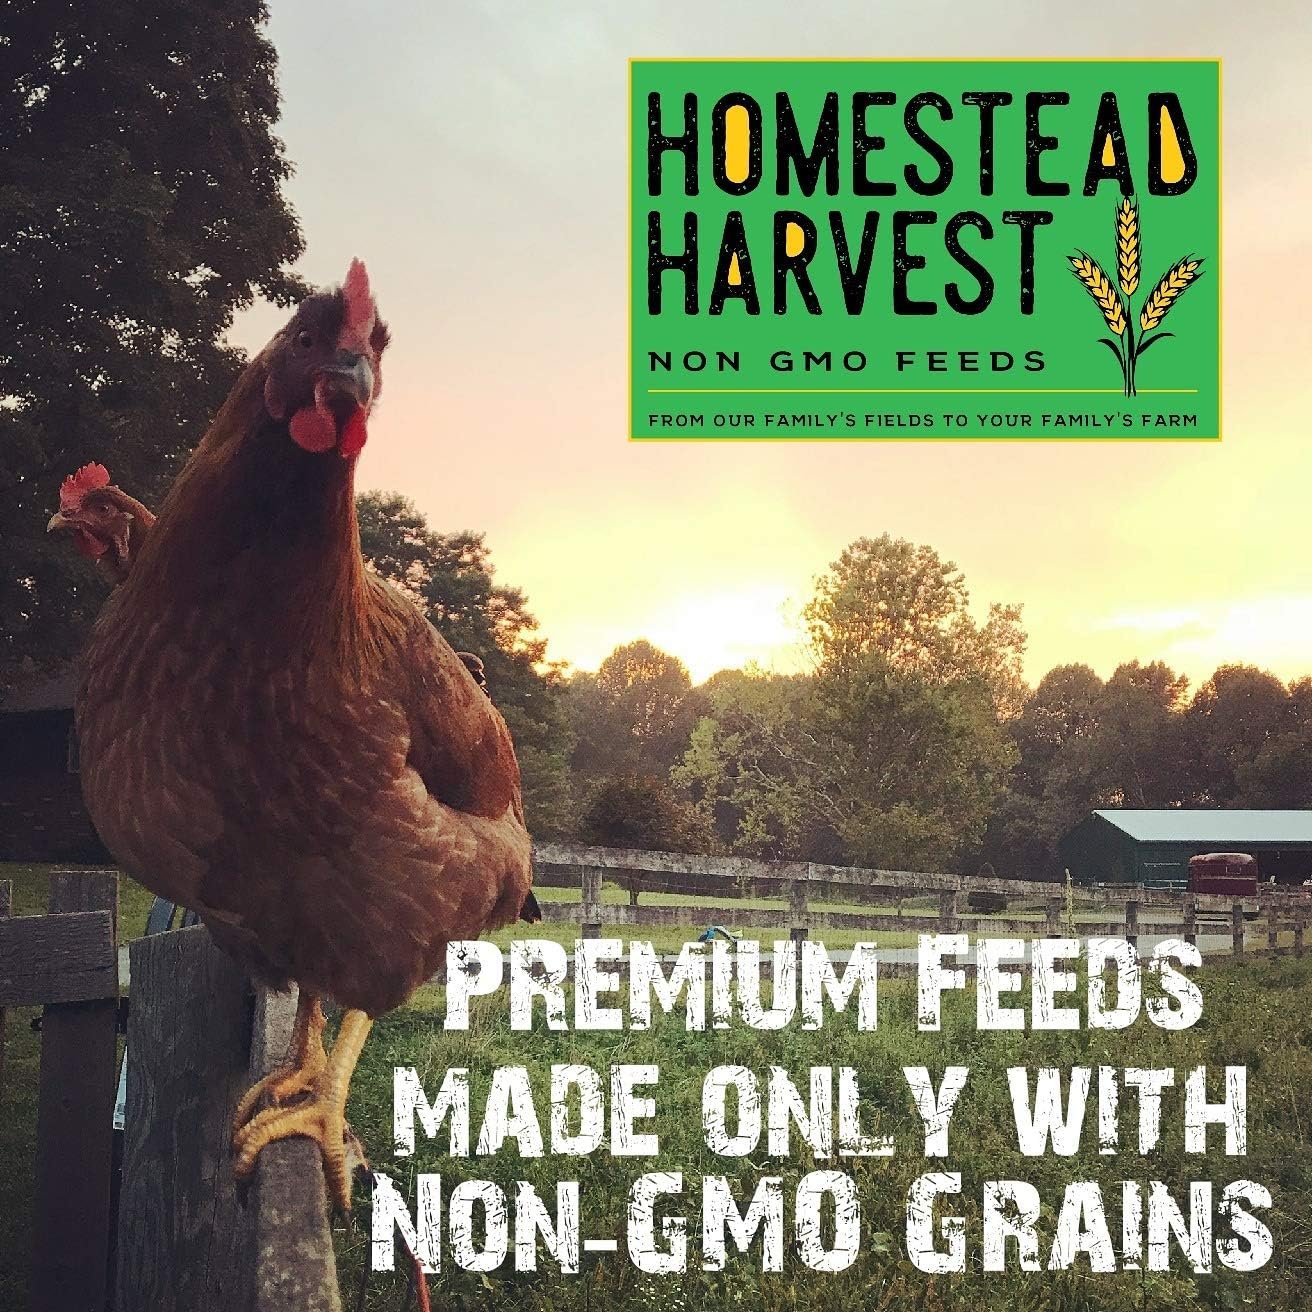 Homestead Harvest Non-GMO Whole Grain Layer Blend 16% for Laying Hens or Ducks 25lb